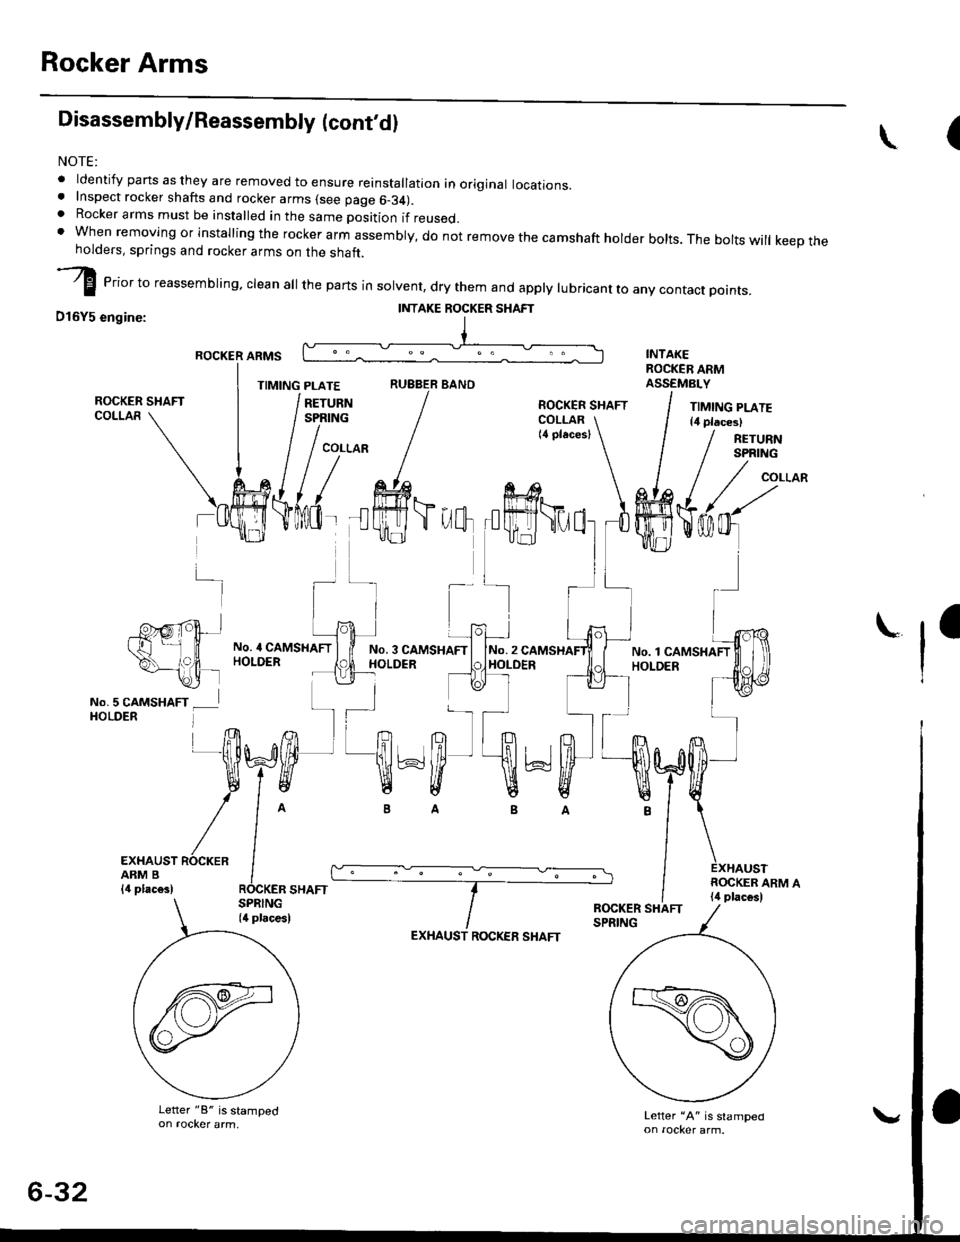 HONDA CIVIC 1999 6.G Workshop Manual Rocker Arms
Disassembly/Reassembly (contdl
NOTE:
. ldentify pans as they are removed to ensure reinstallation in original locations.. Inspect rocker shafts and rocker arms (see page 6-34).. Rocker ar